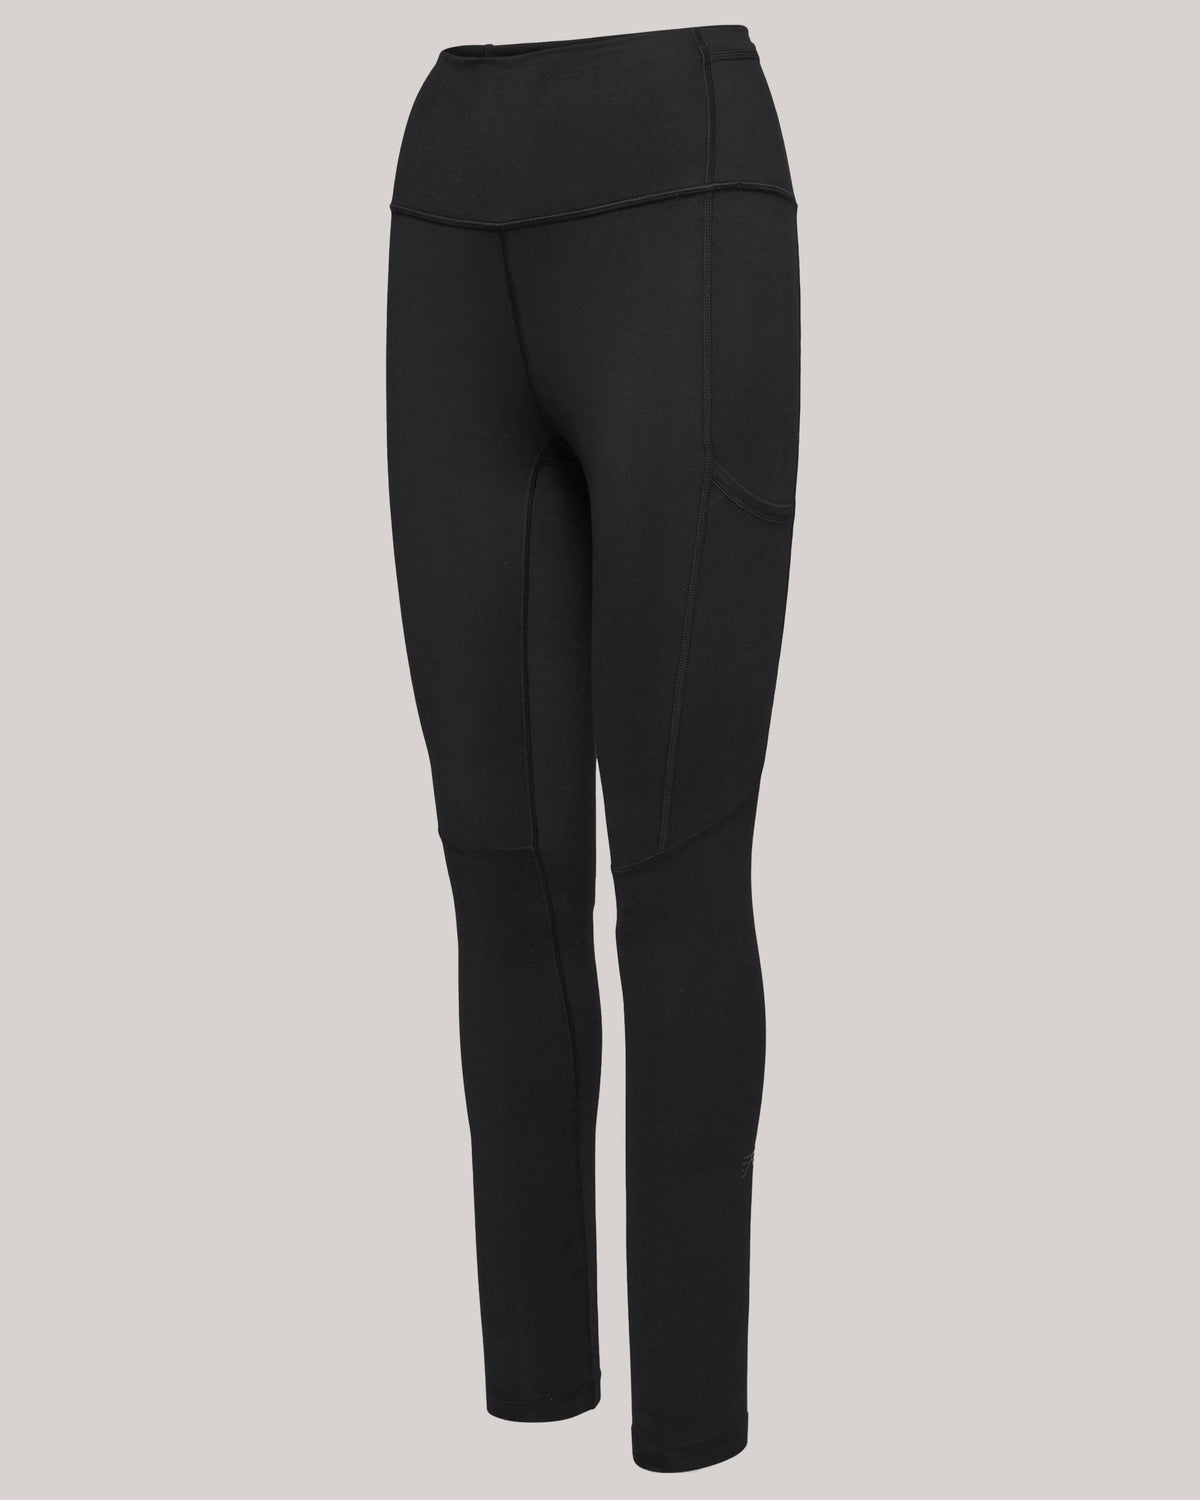 High Waist Stretch Yoga All In Motion Leggings With Pockets For